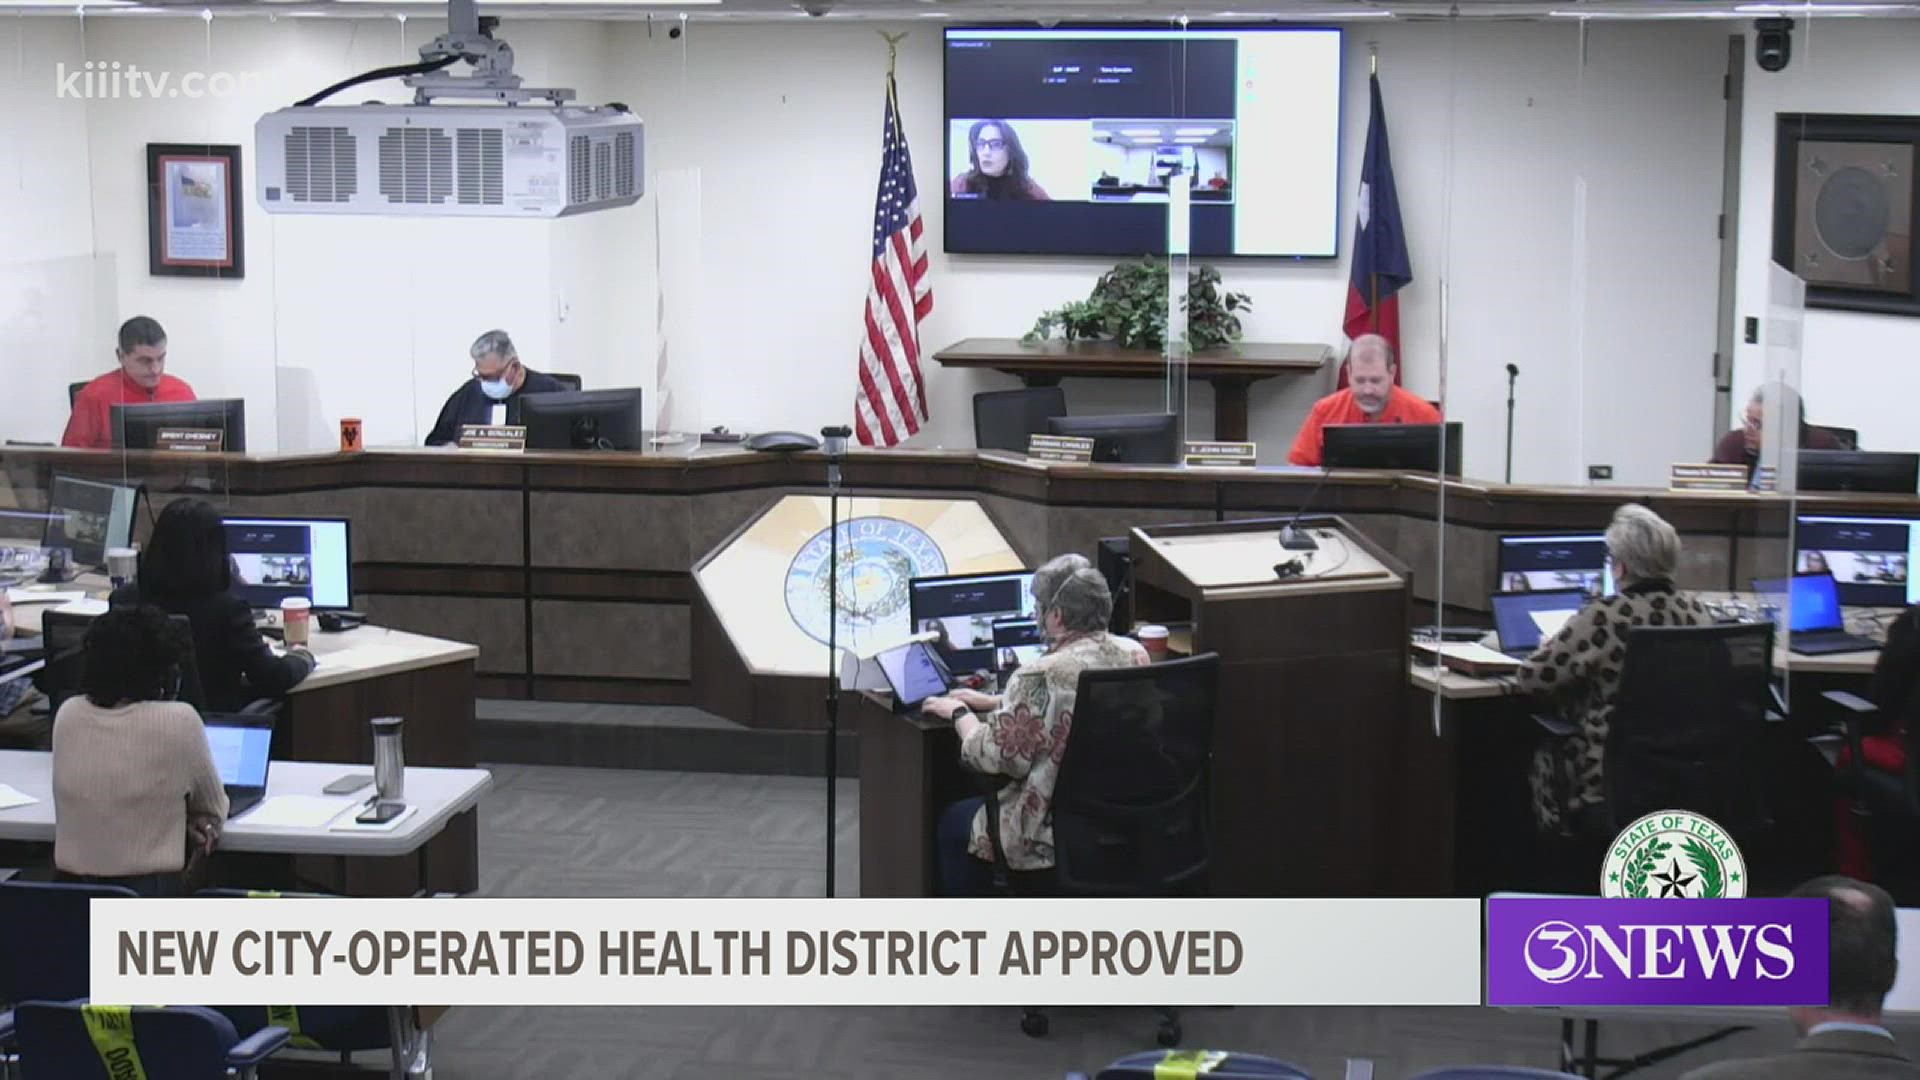 Effective Tuesday, March 1, the City of Corpus Christi will take full management authority of the existing Health District.